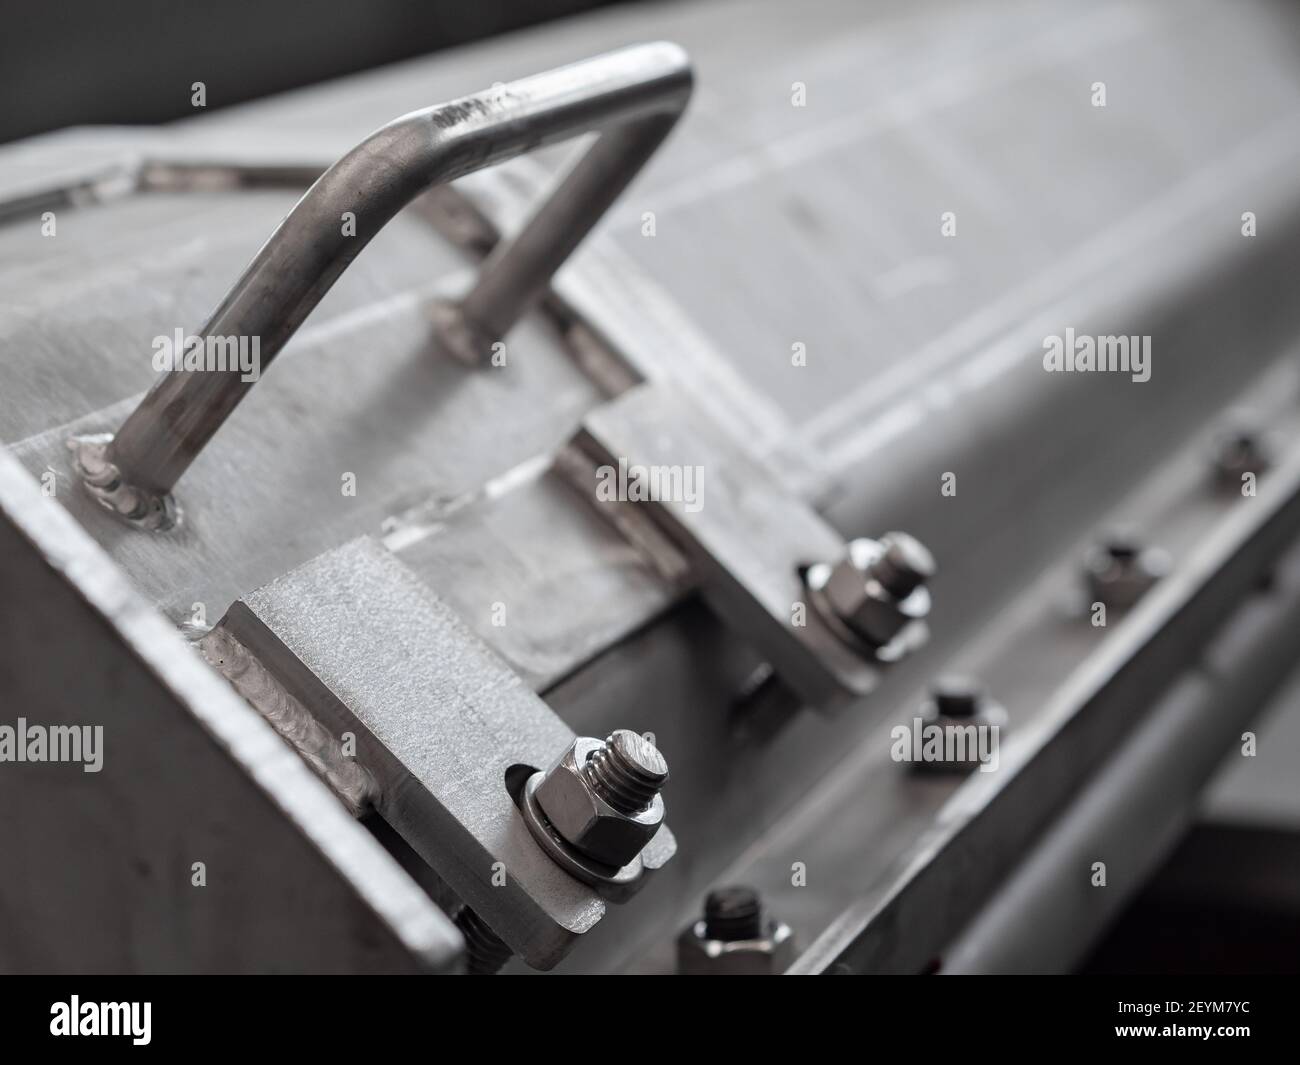 Closeup of hatch and handle of enclosed screw conveyor made from stainless steel. Shallow depth of field with the bolt in the foreground in focus. Stock Photo